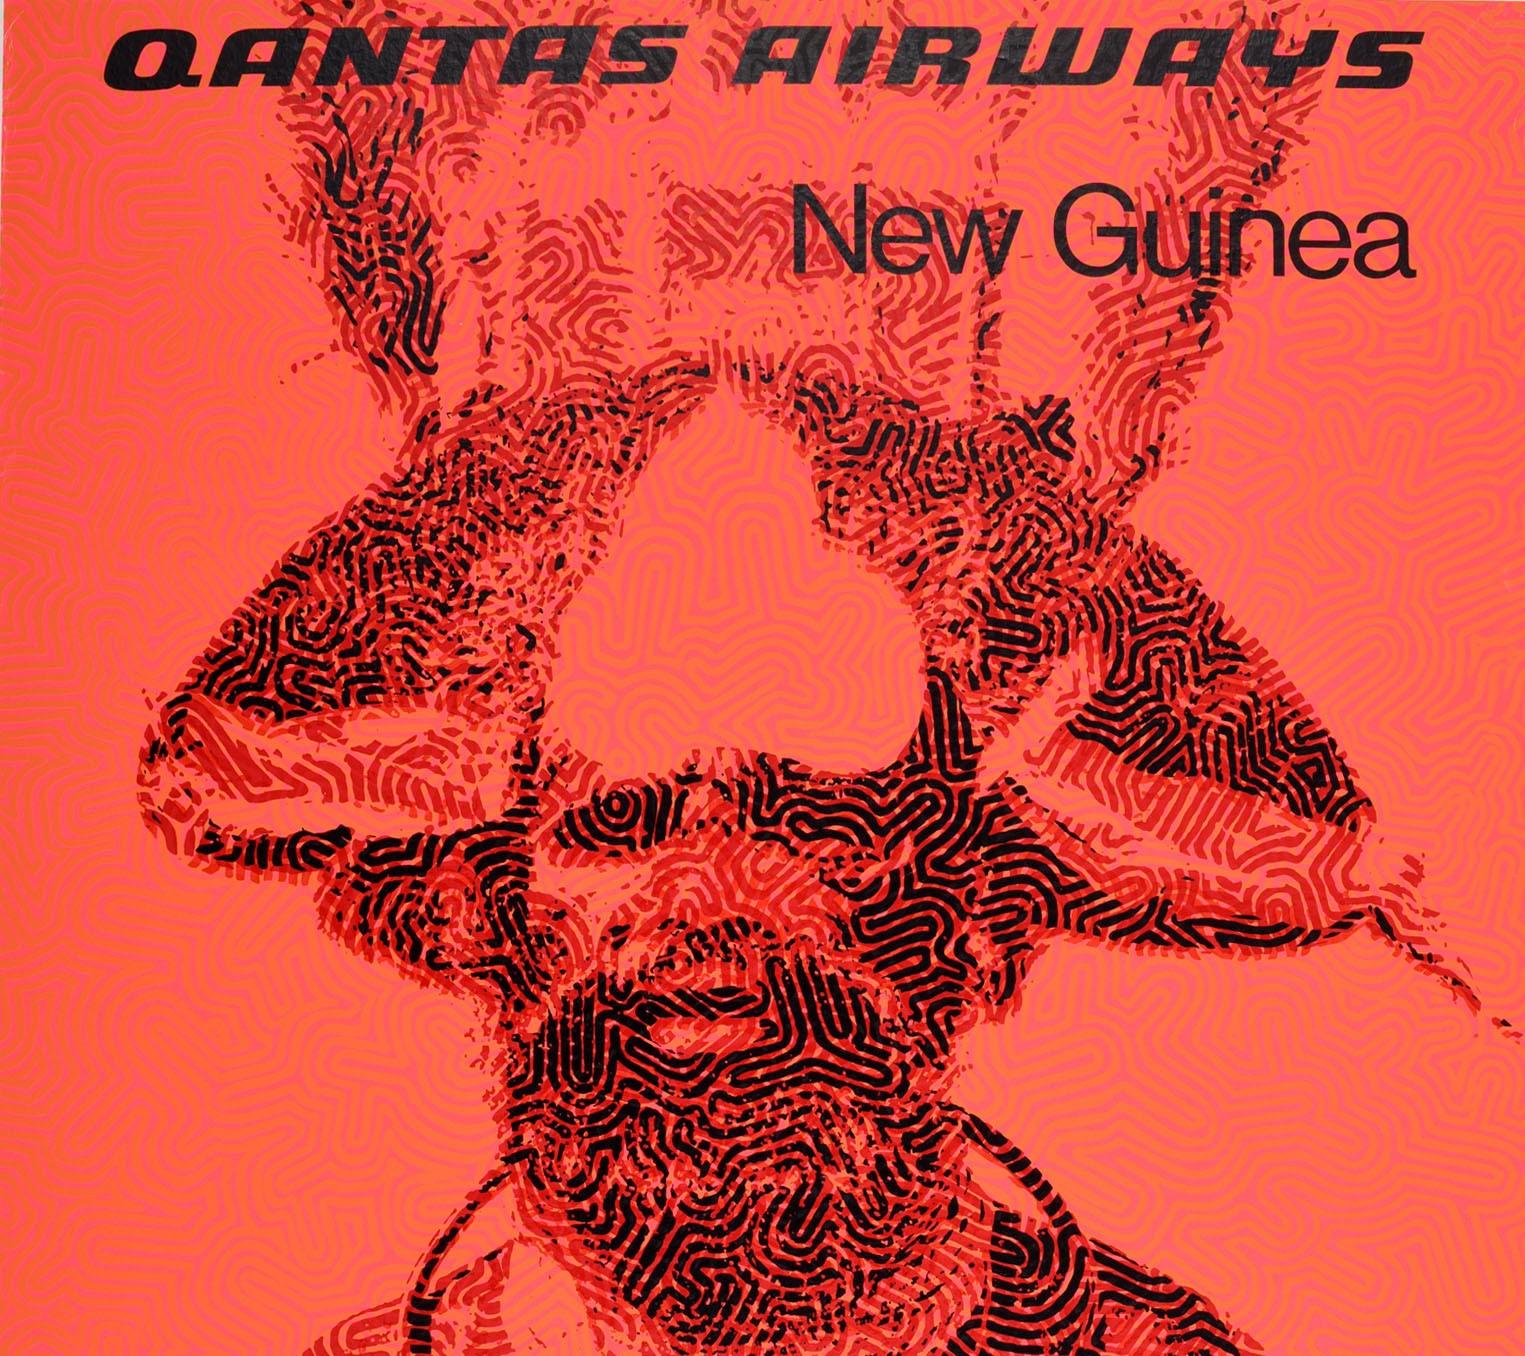 Original vintage travel poster for New Guinea issued by Qantas Airways featuring a traditional style image of a man against a pink shaded background. Part of Melanesia the island of New Guinea is located in the Pacific Ocean to the north of